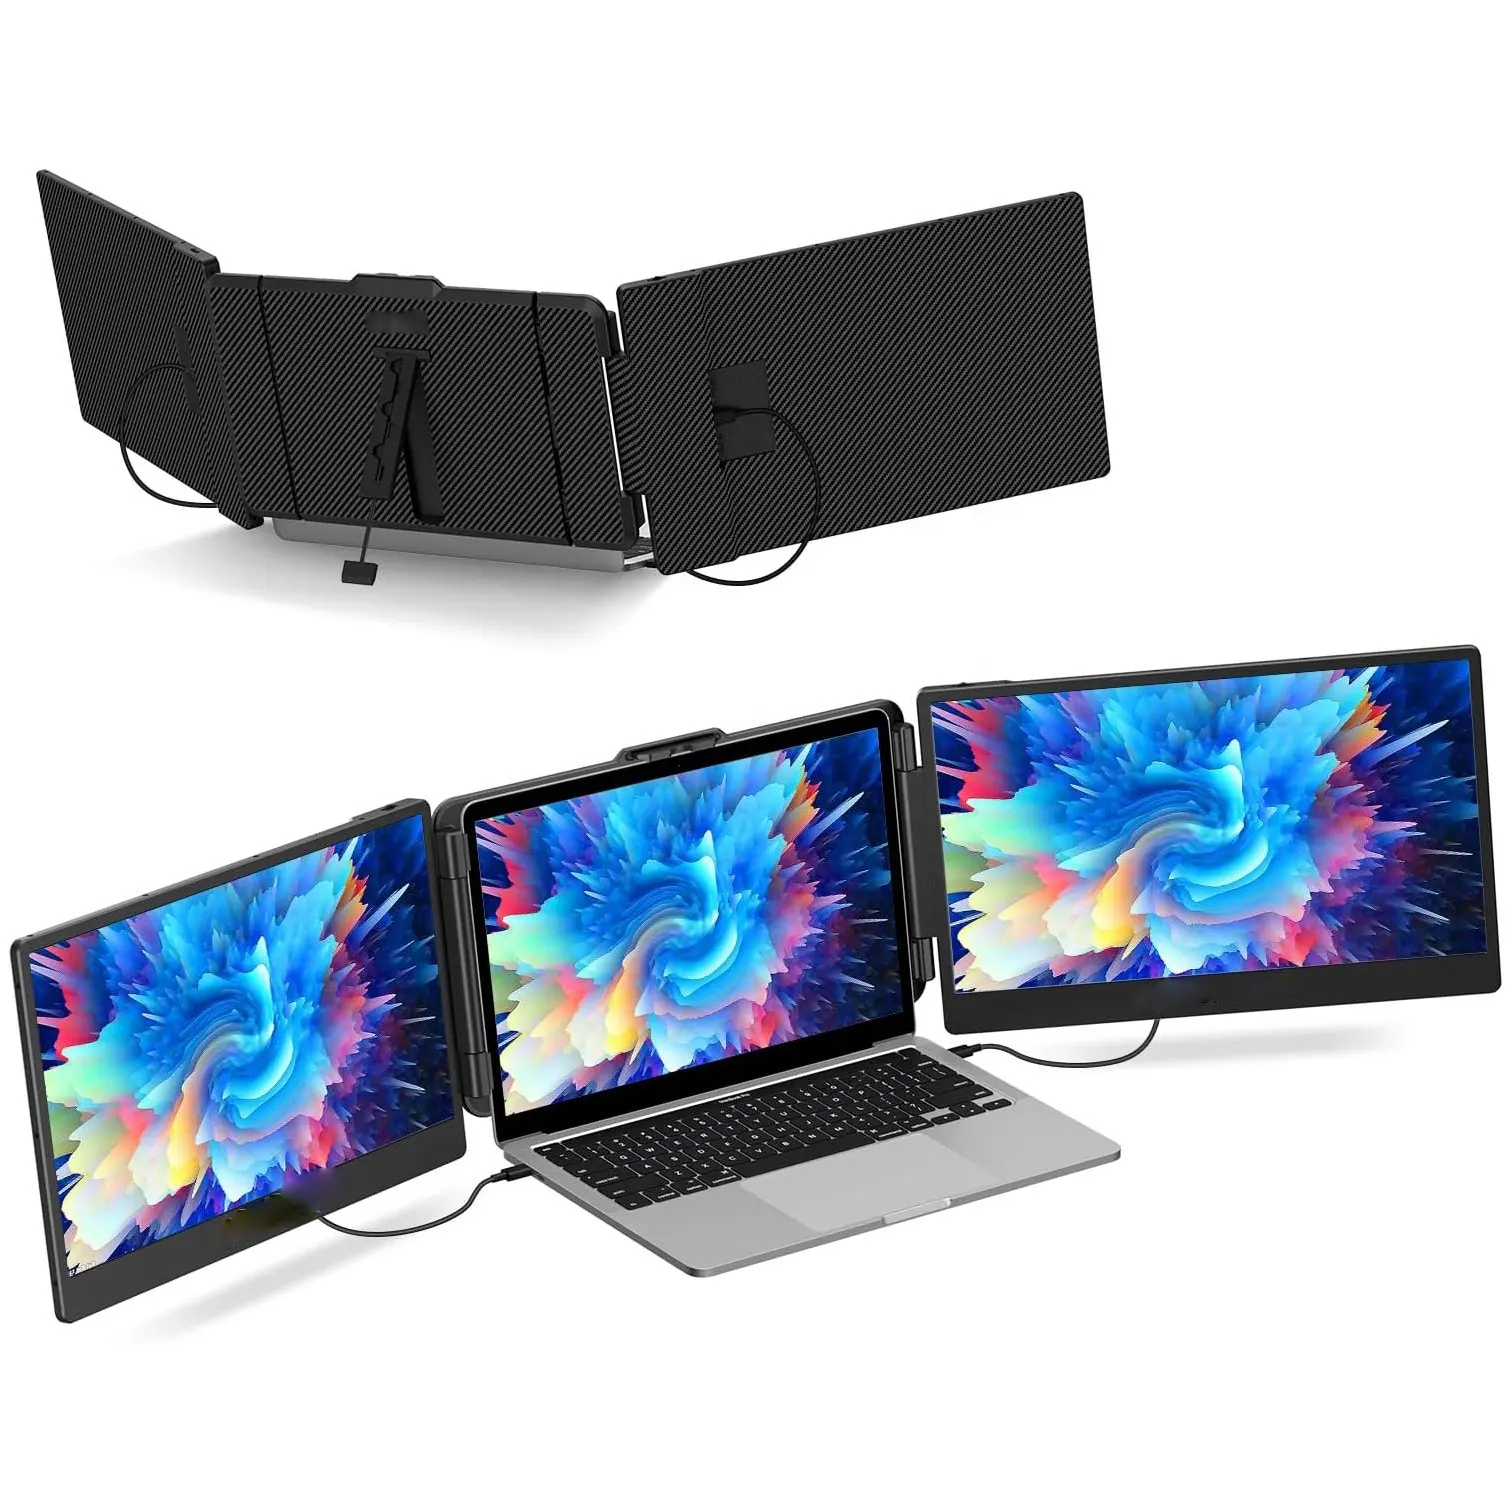 FHD 1080P IPS Display Plug & Play for Multiple Device Type-C Hdmi Double Monitor Laptop Screen Extender